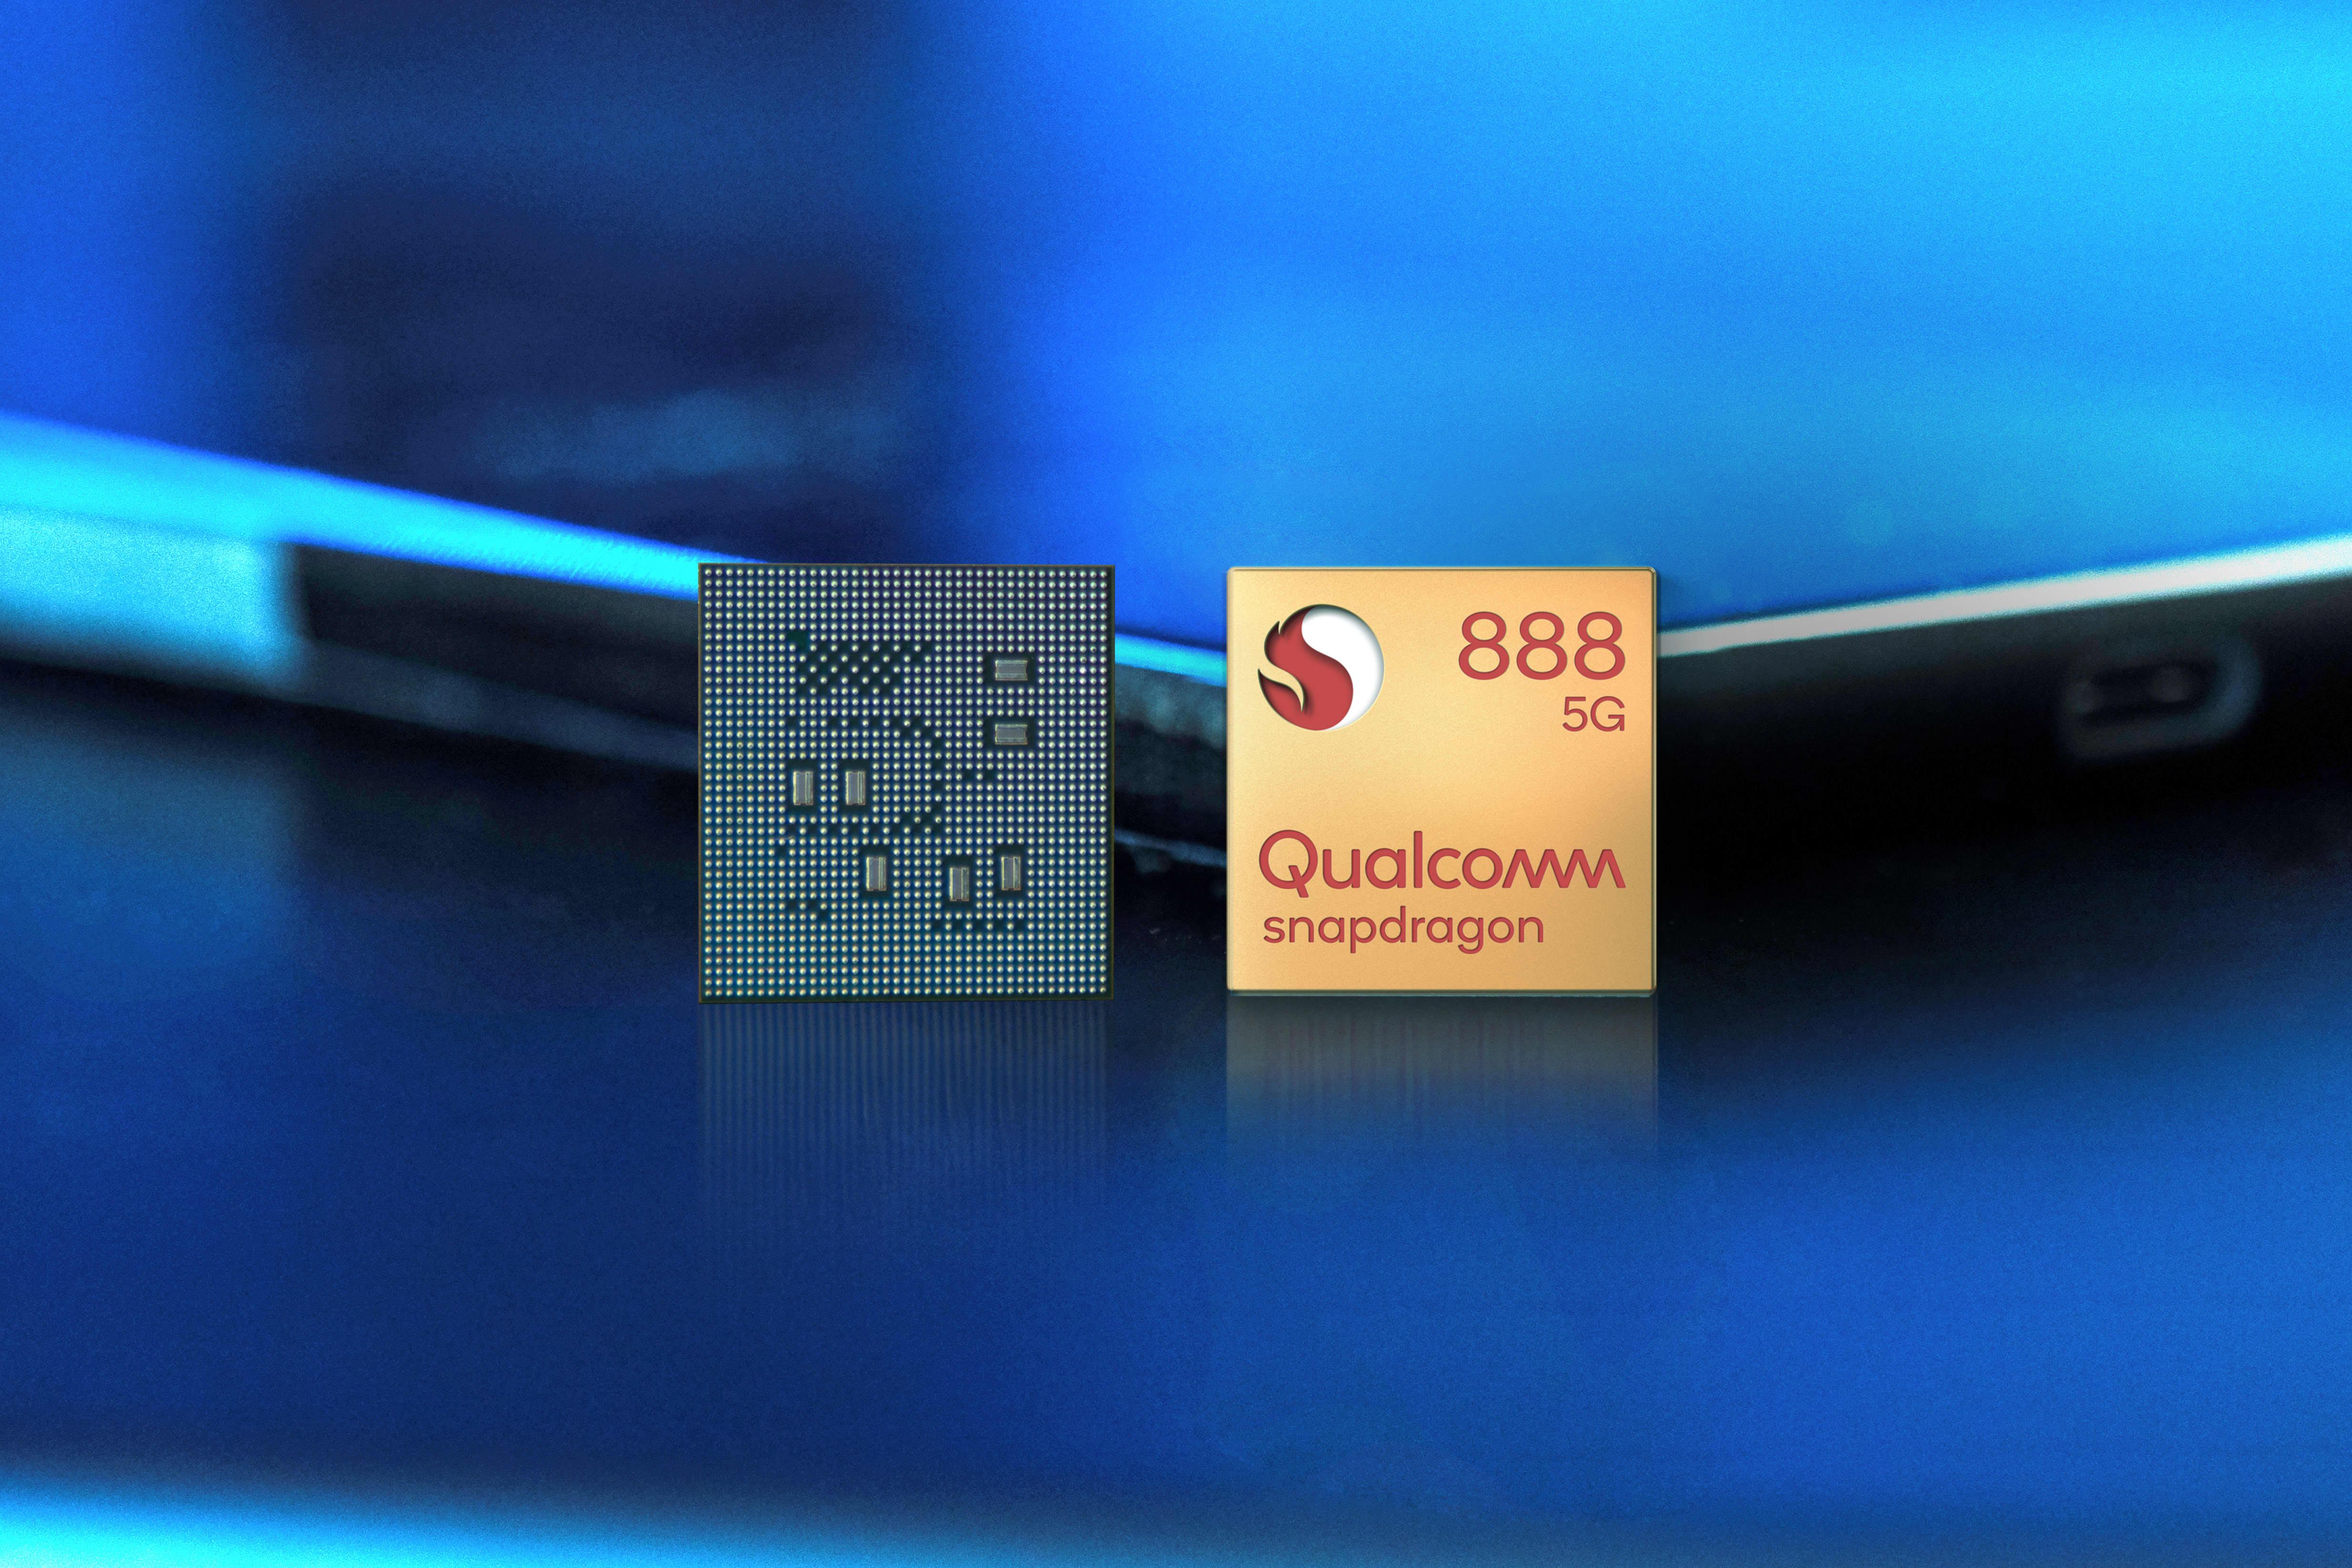 Qualcomm Snapdragon 888 chip for 5G Android phones announced